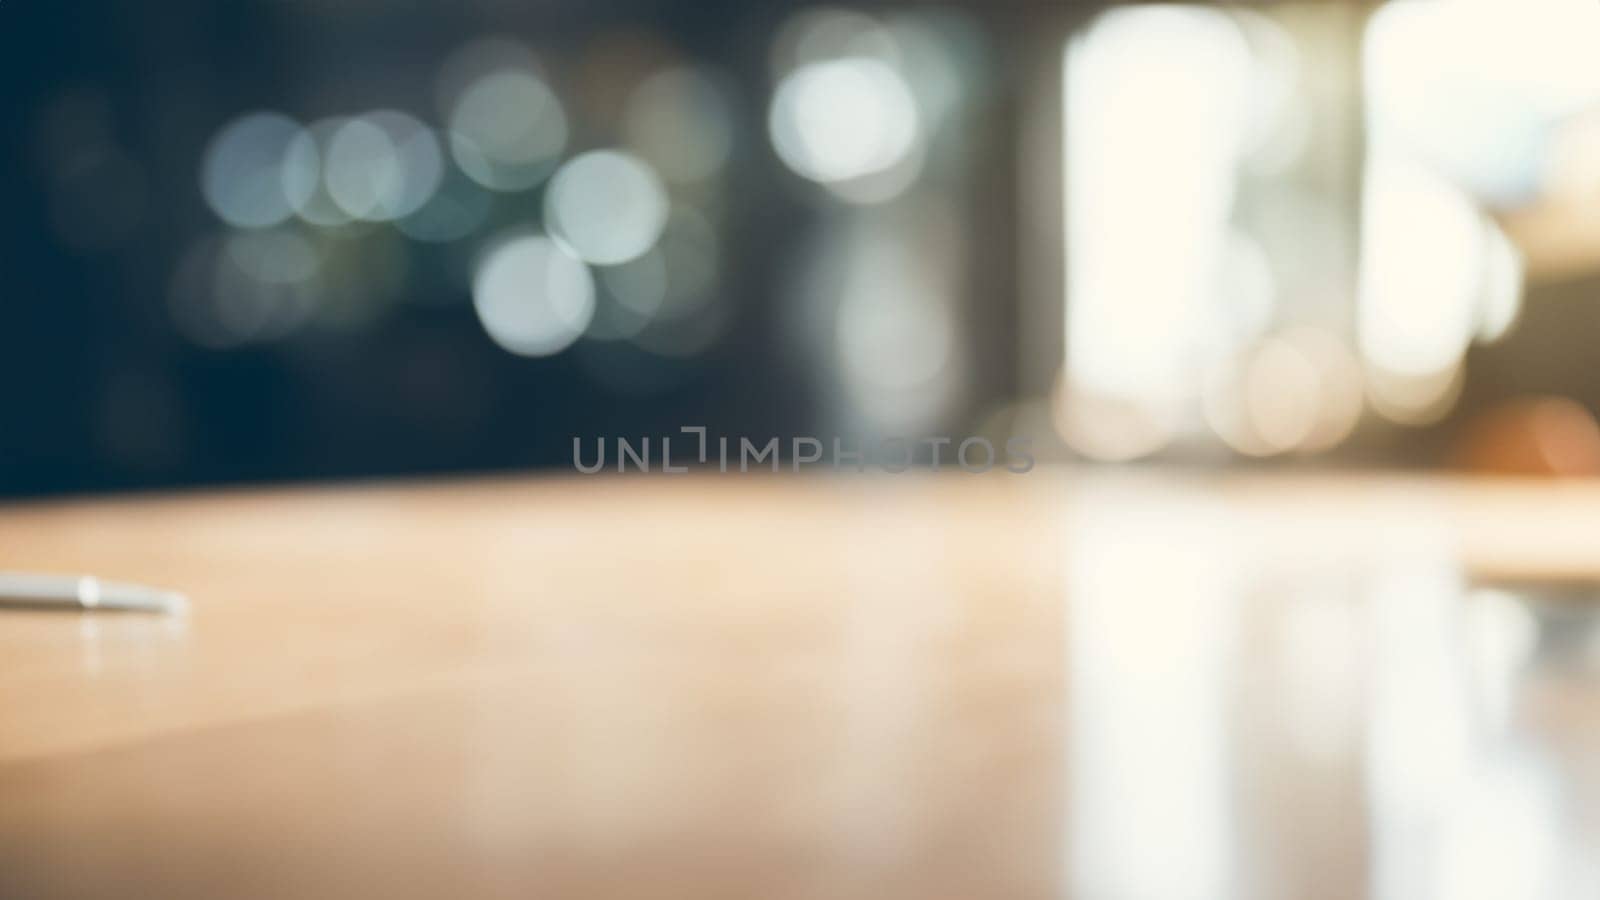 Blurred serene, unoccupied workspace bathed in natural light. Wooden desk with reflection. Minimalist beauty of uncluttered desk. Blurred Abstract Bokeh background for design